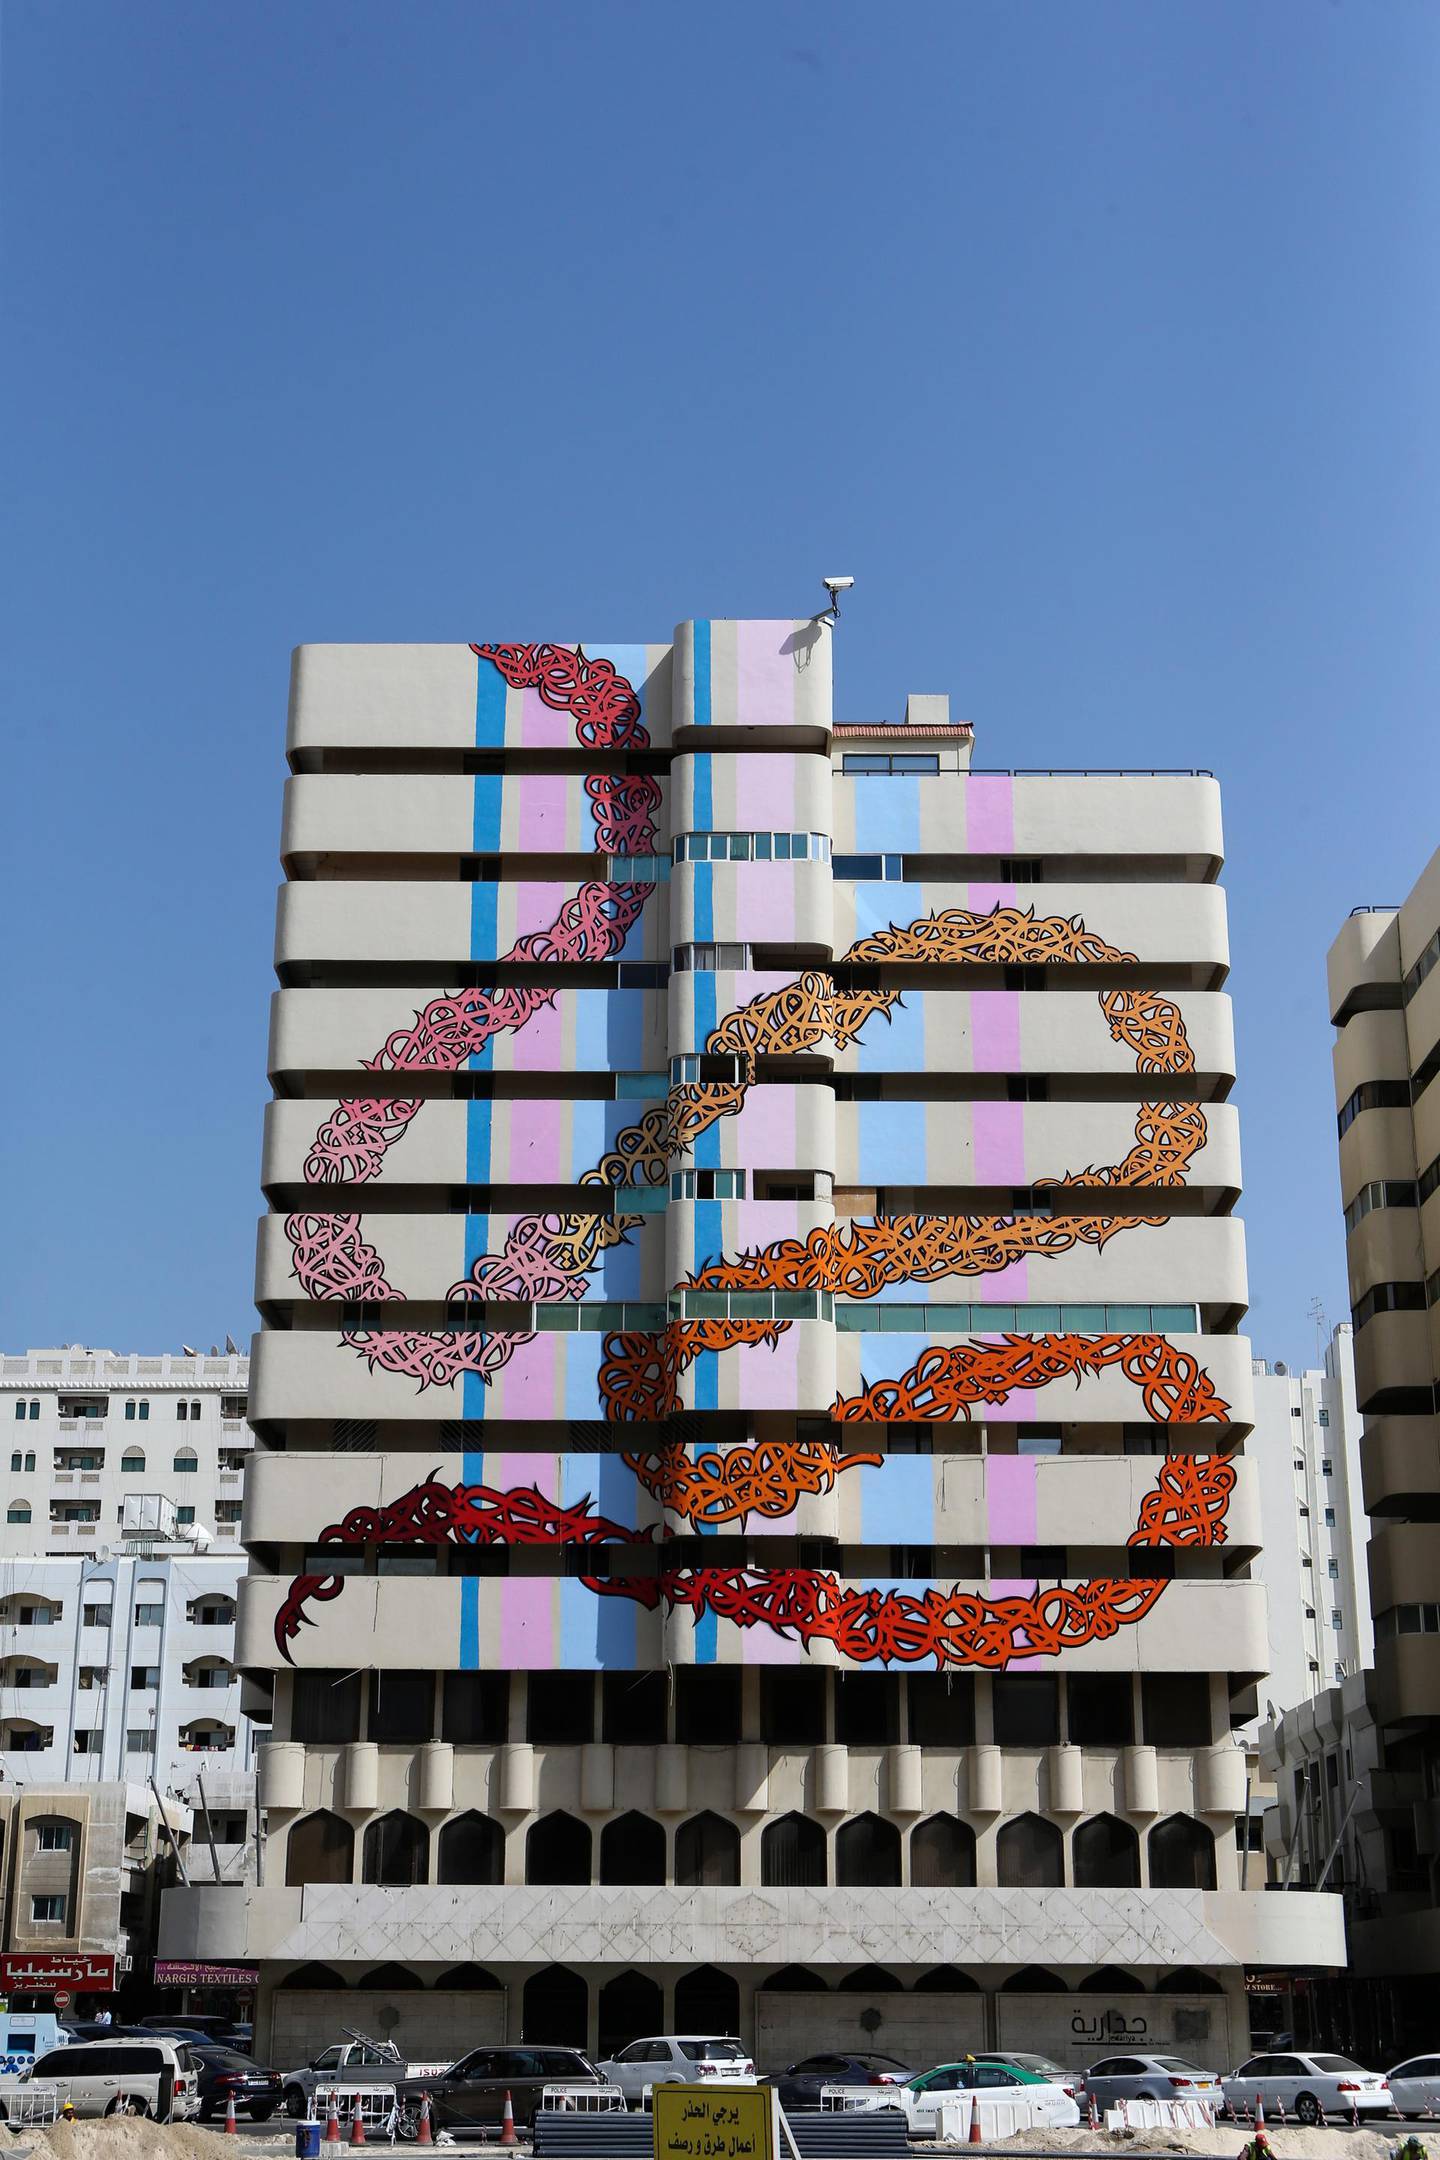 SHARJAH, UAE. February 15, 2015 -   Street artist eL Seed painted an abandoned building on Bank Street as part of the new initiative by the Sharjah government to bring art into public places, February 15, 2015. (Photos by: Sarah Dea/The National, Story by: Anna Seaman, Arts and Life) *** Local Caption ***  SDEA150215-elseed04.JPG